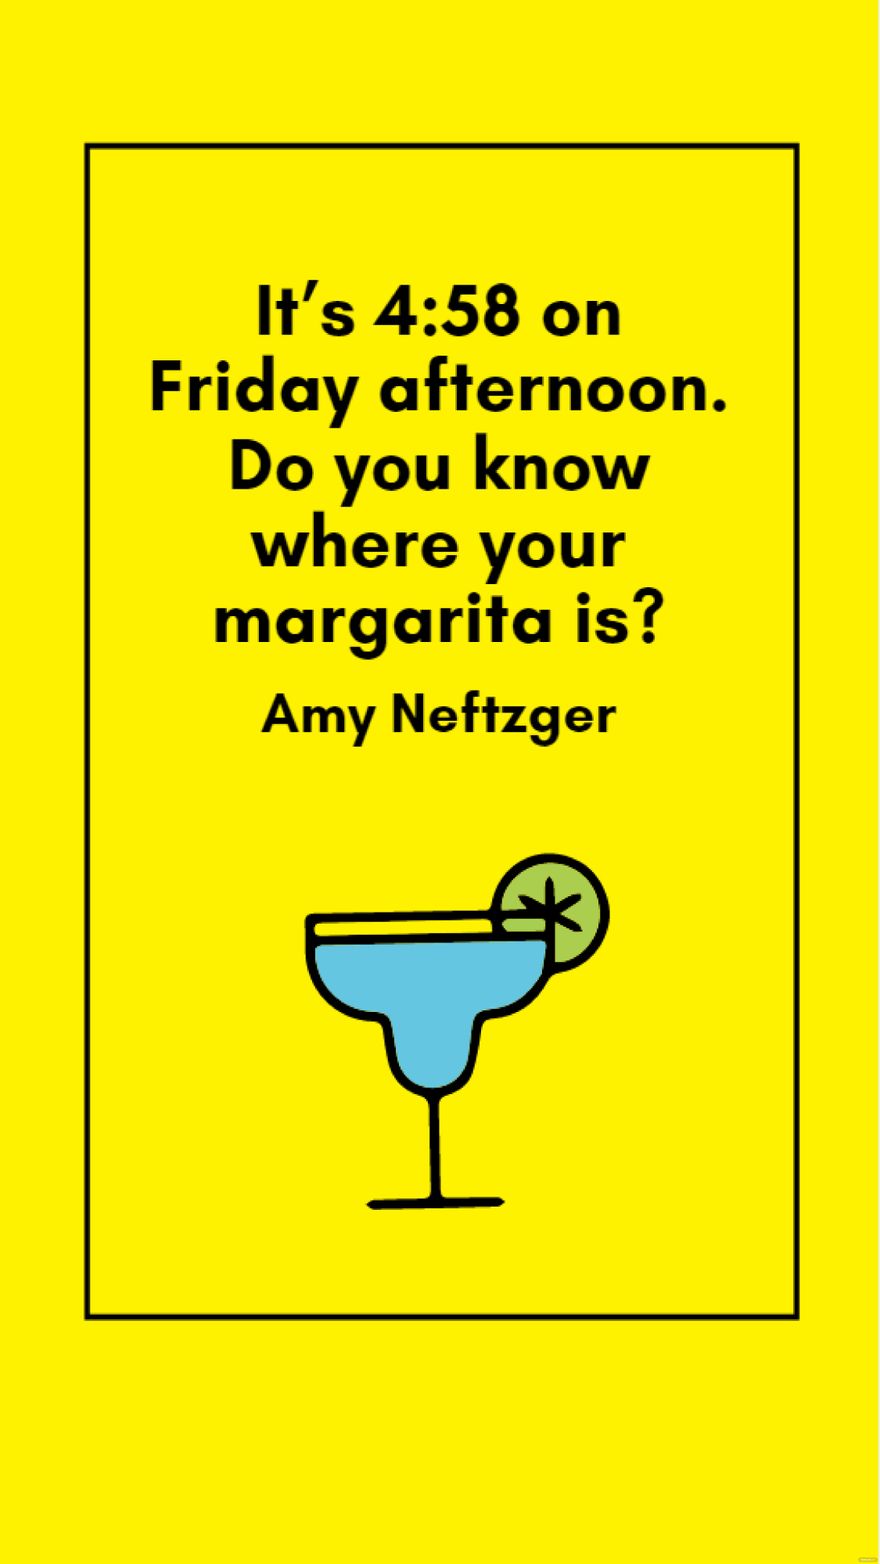 Amy Neftzger - It’s 4:58 on Friday afternoon. Do you know where your margarita is? 